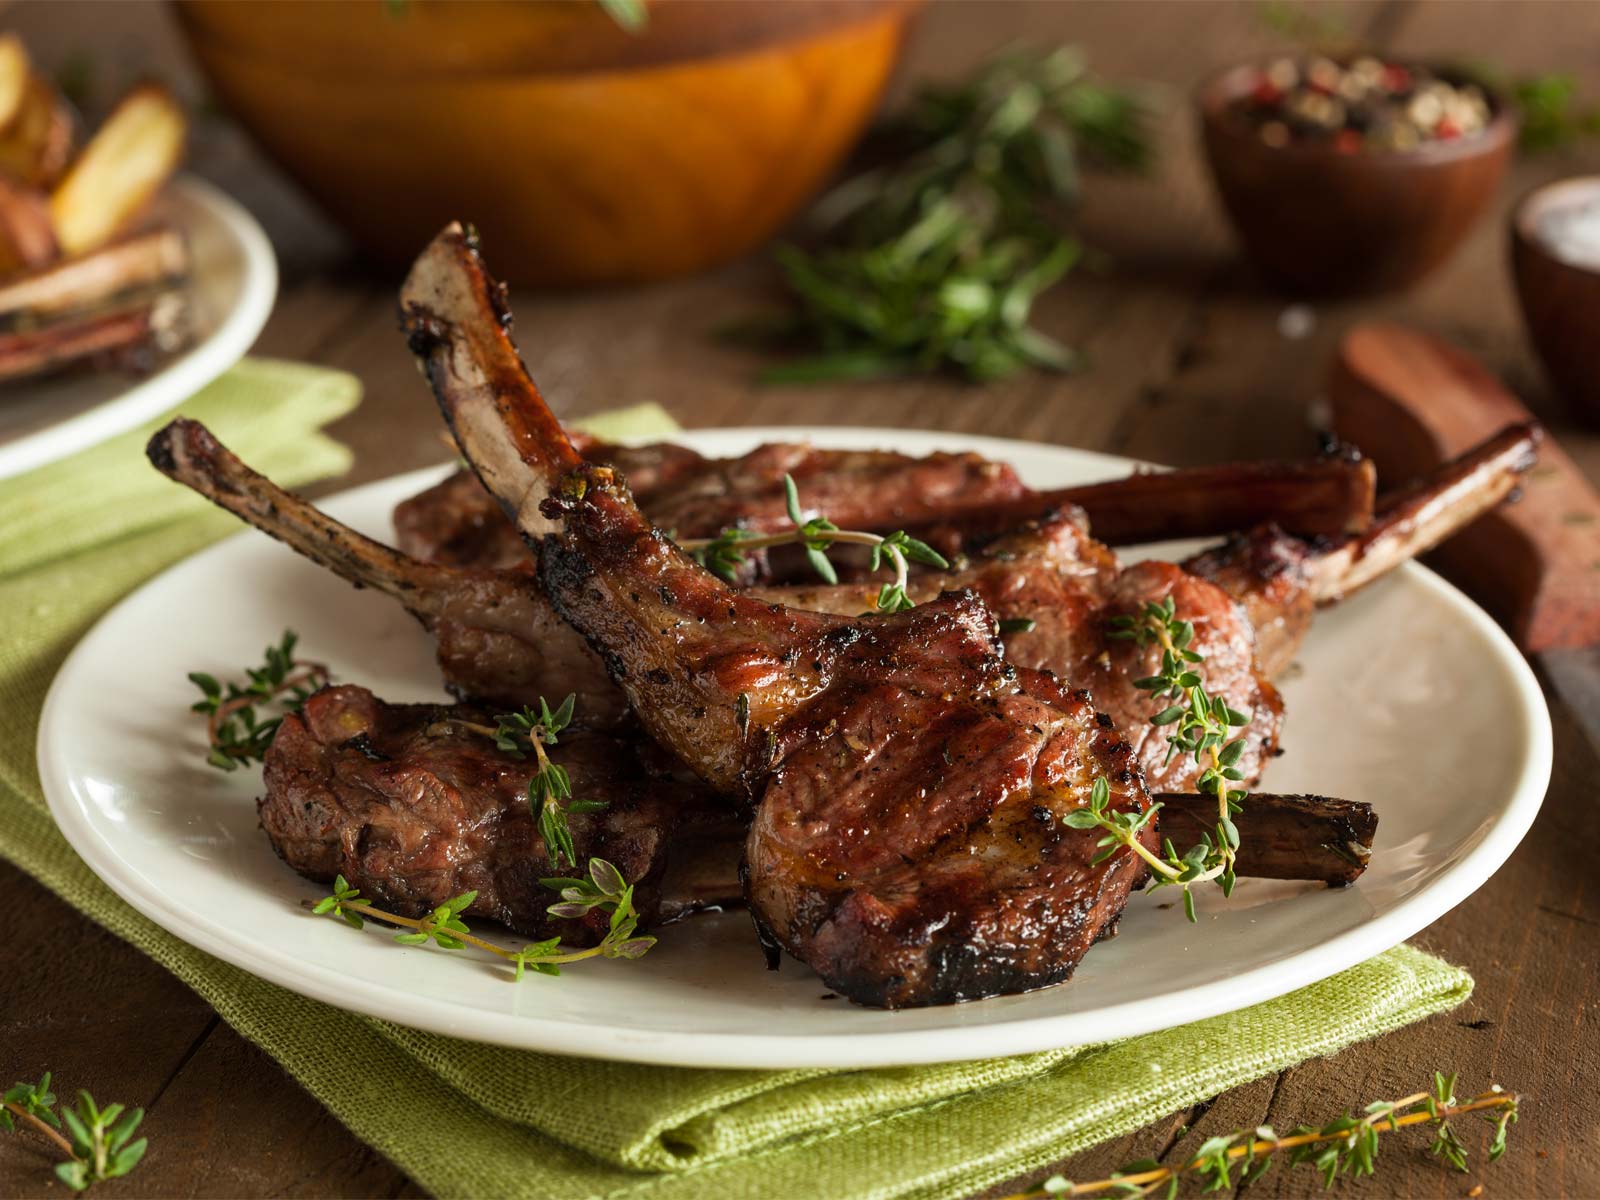 Lamb Meat Nutrition: Our Dietitians' Thoughts On Grass-Fed Lamb